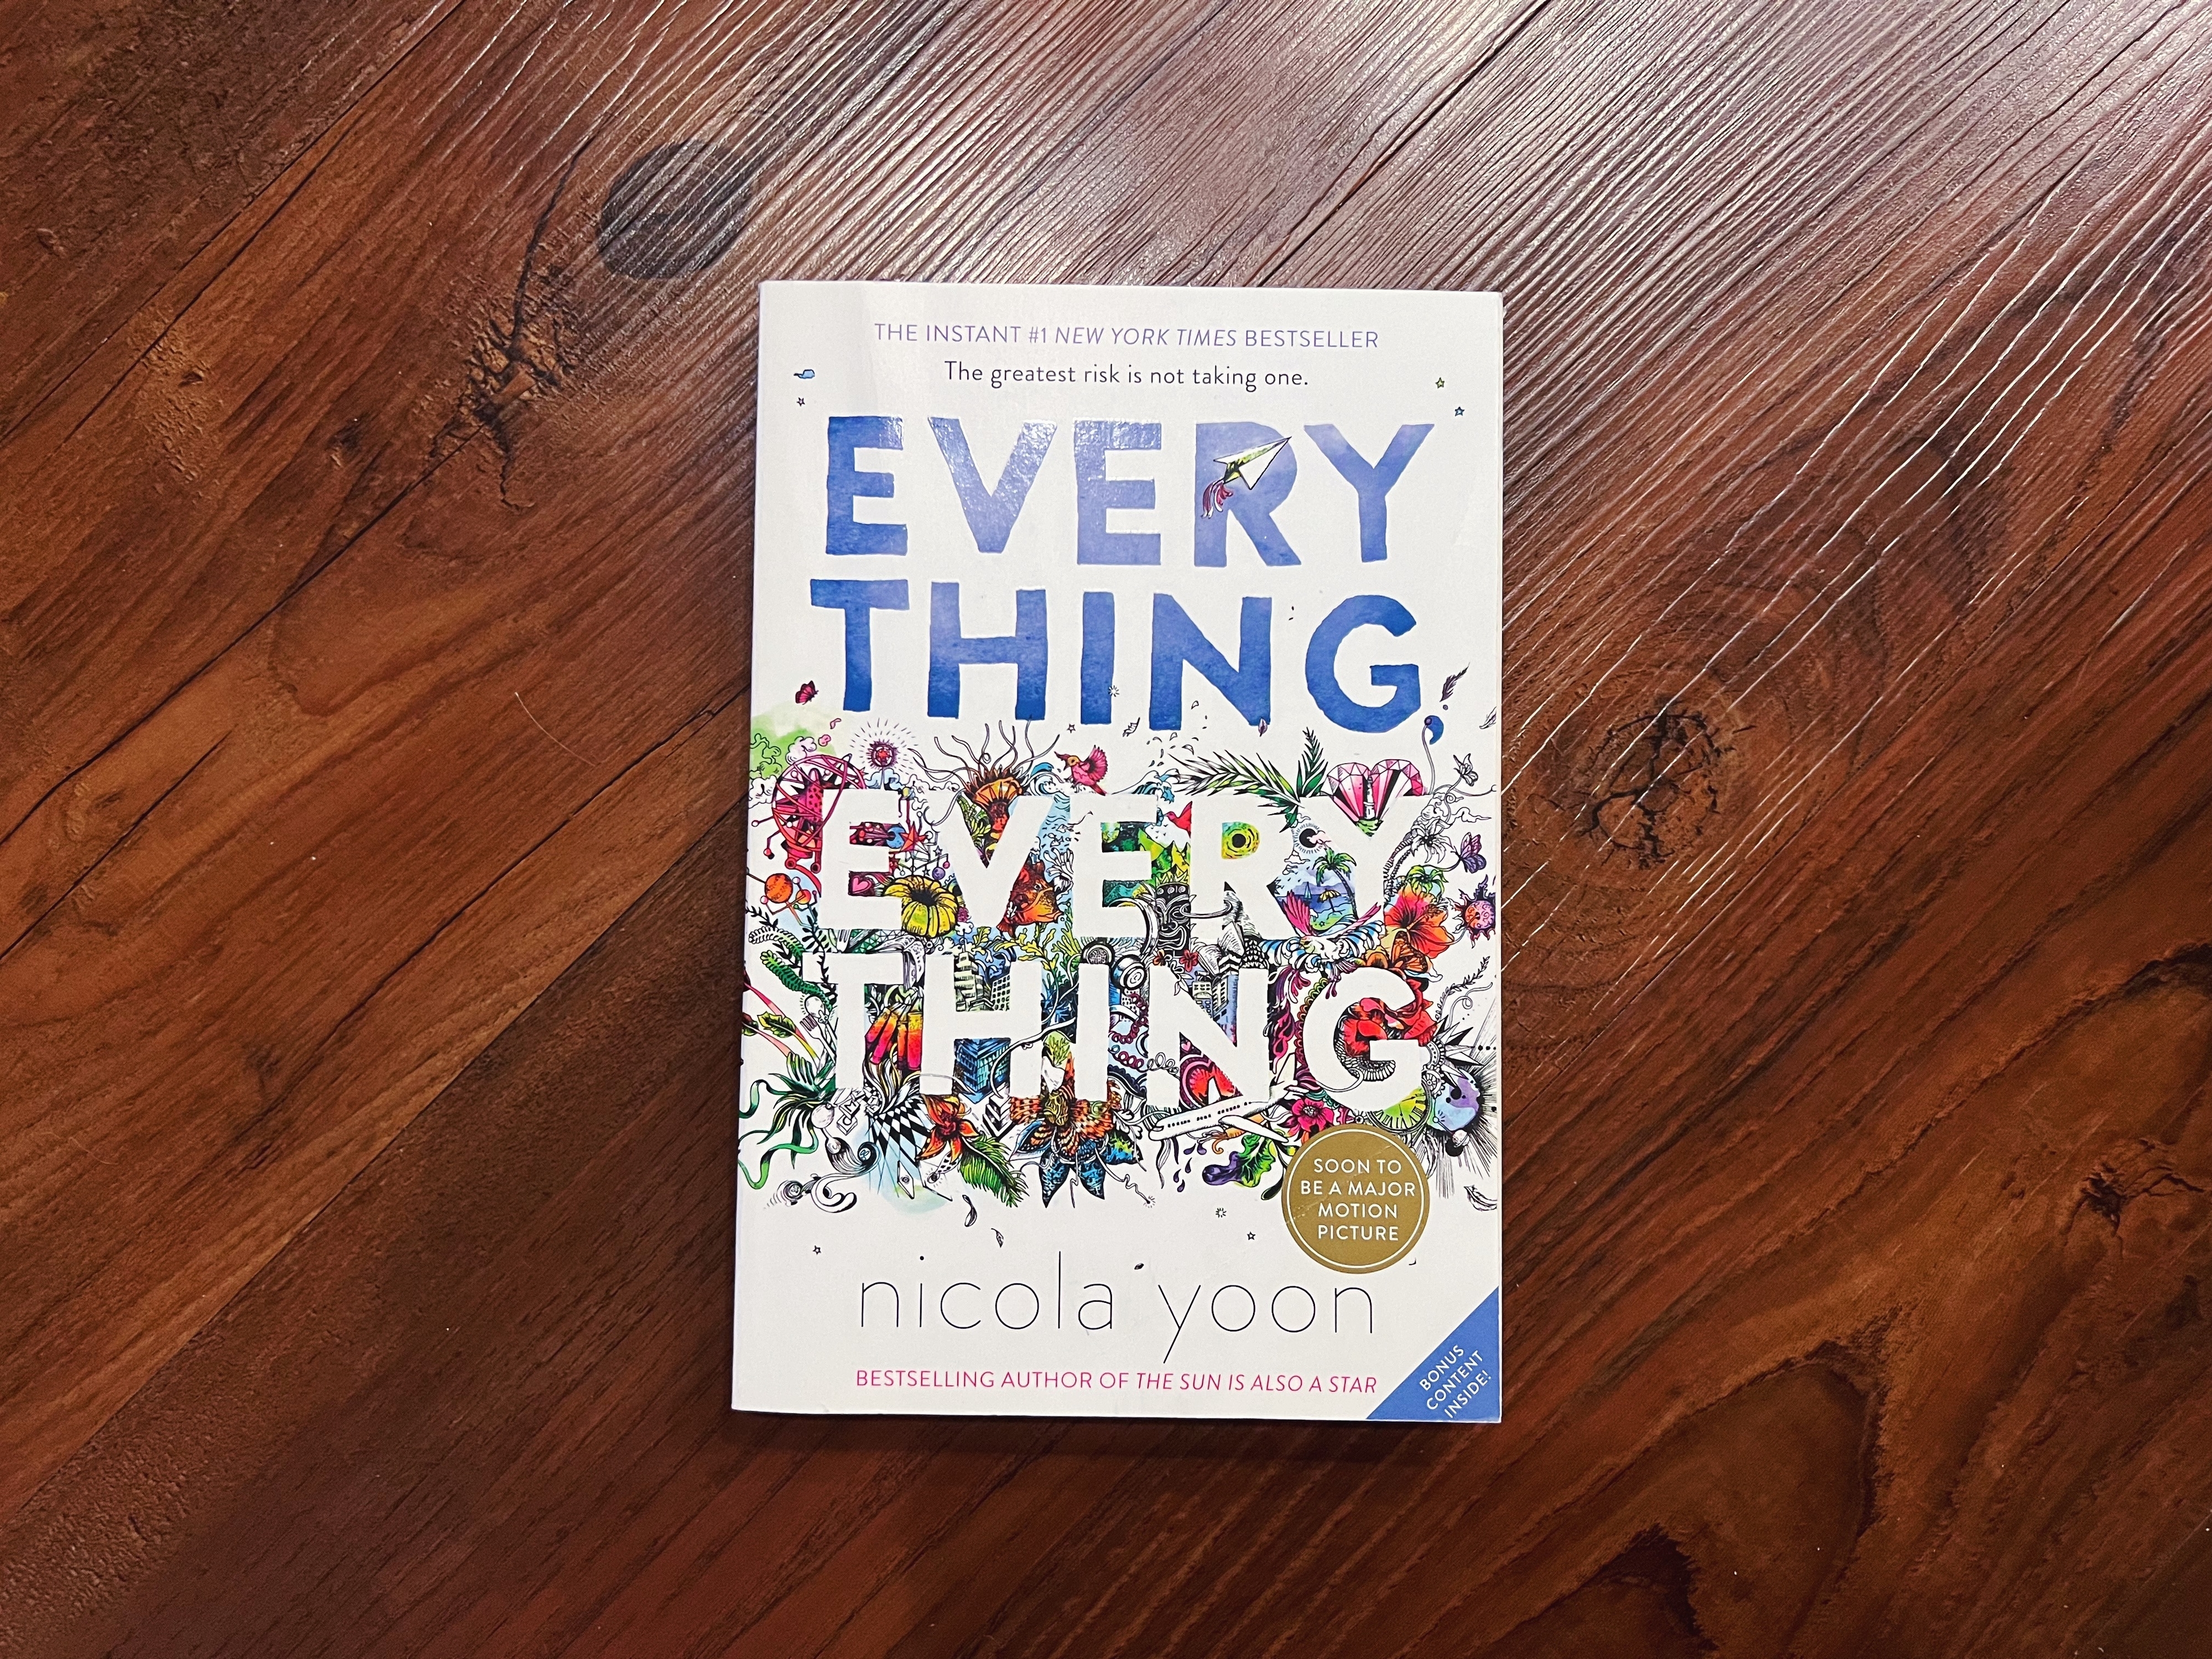 The photo shows the book &#x27;Everything, Everything&#x27; by Nicola Yoon on a wooden surface